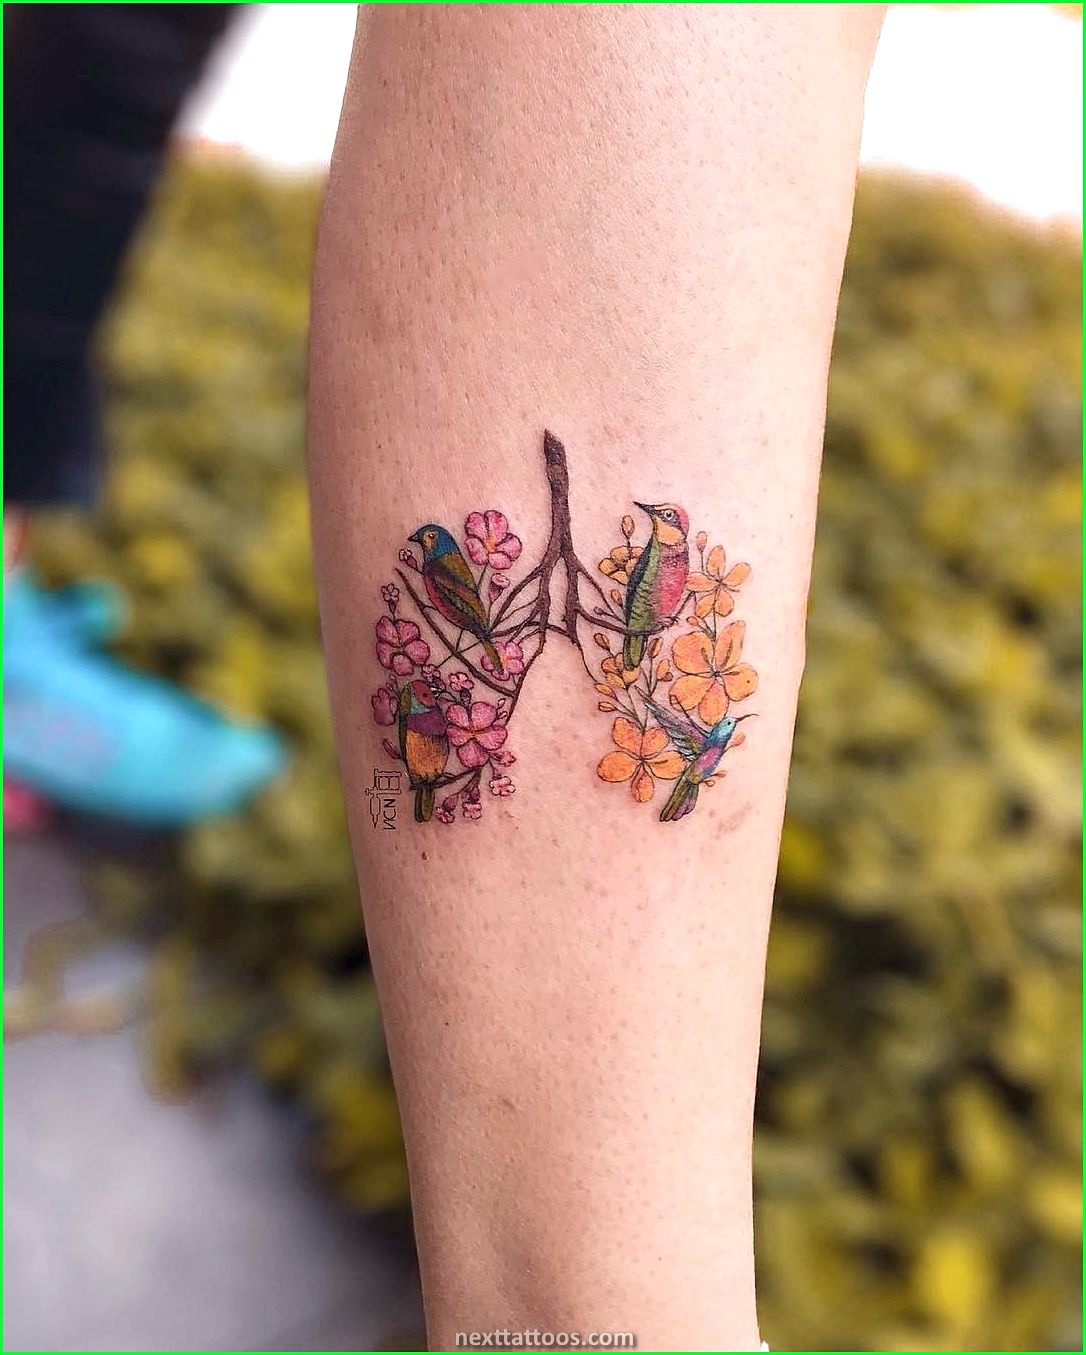 Small Nature Tattoos - Inspiration From Nature